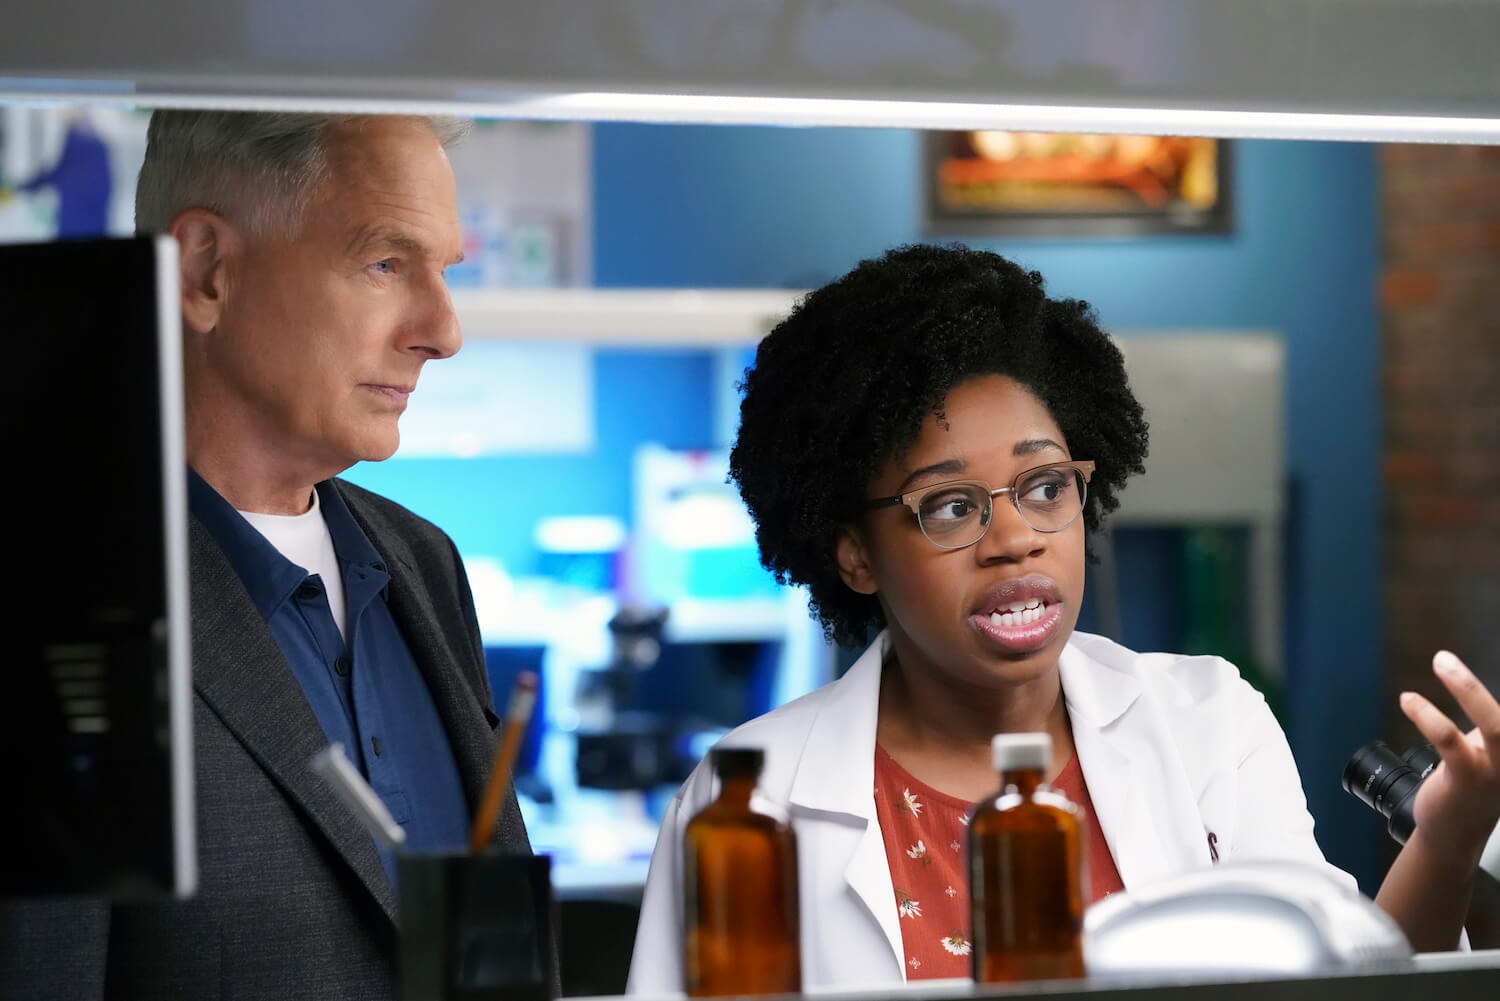 'NCIS' stars Mark Harmon and Diona Reasonover in a scene together